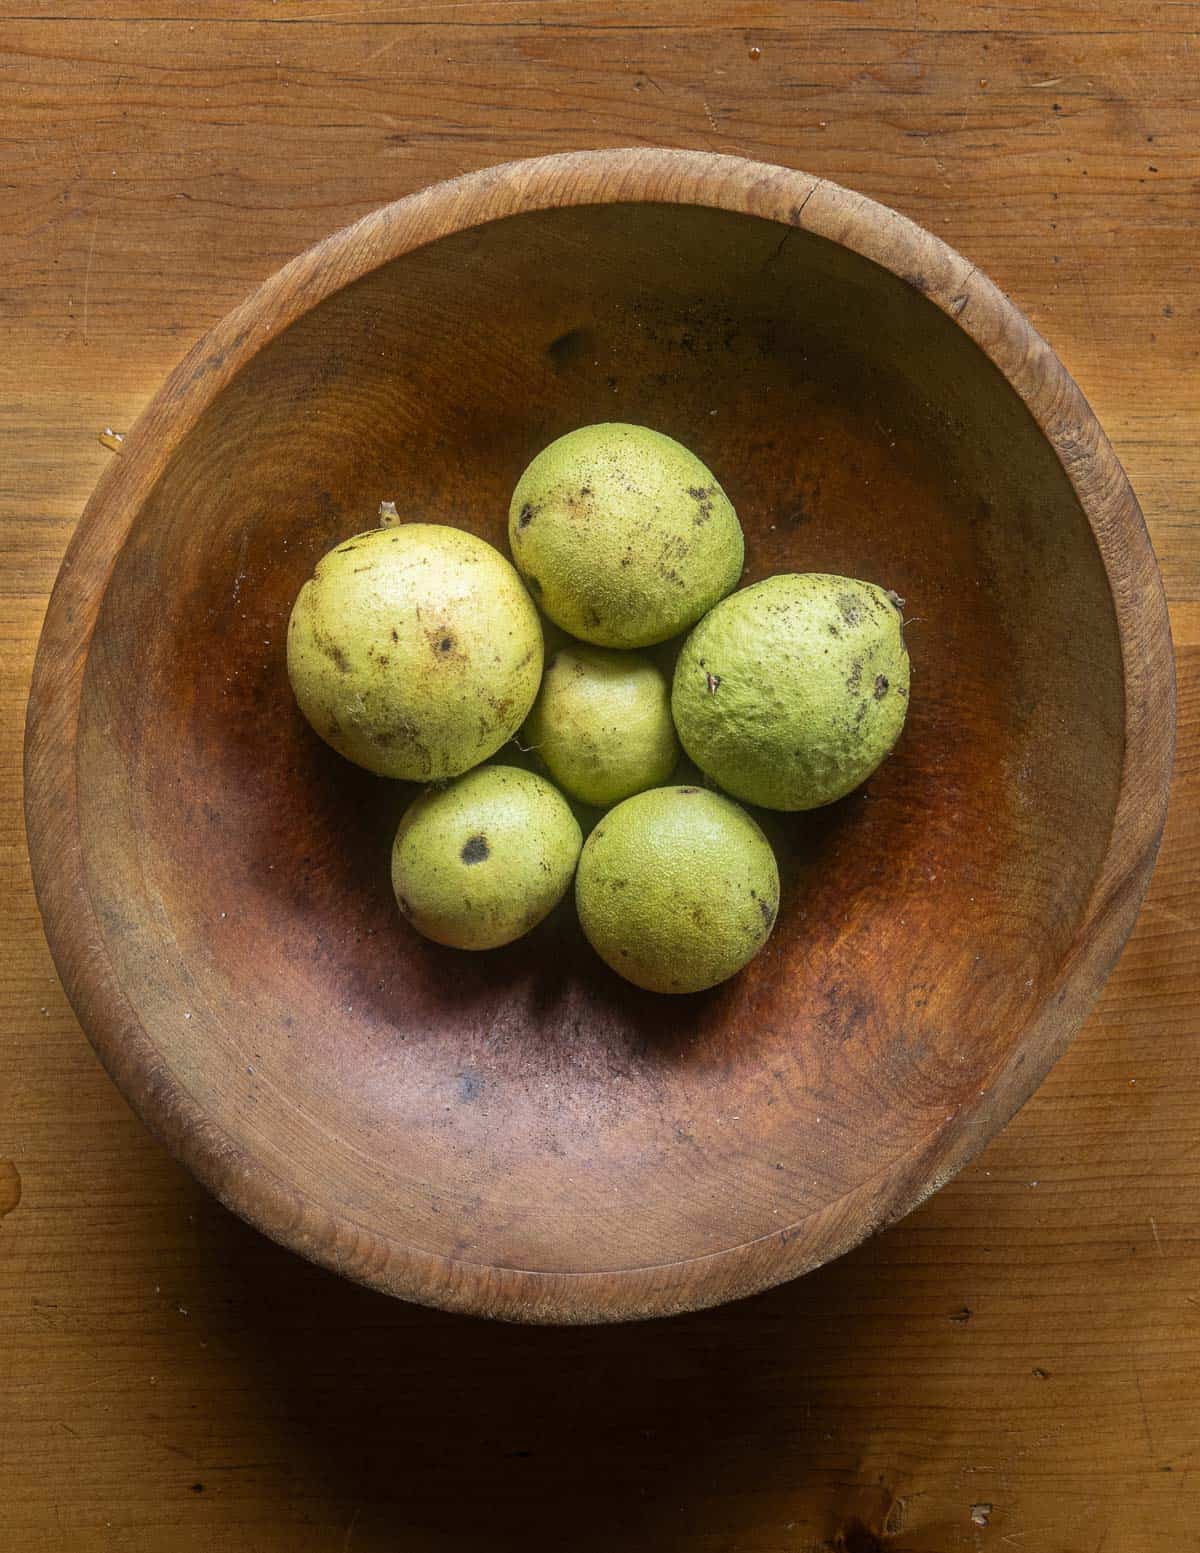 Black walnuts inside the green hulls in a bowl showing the size variation between trees. 